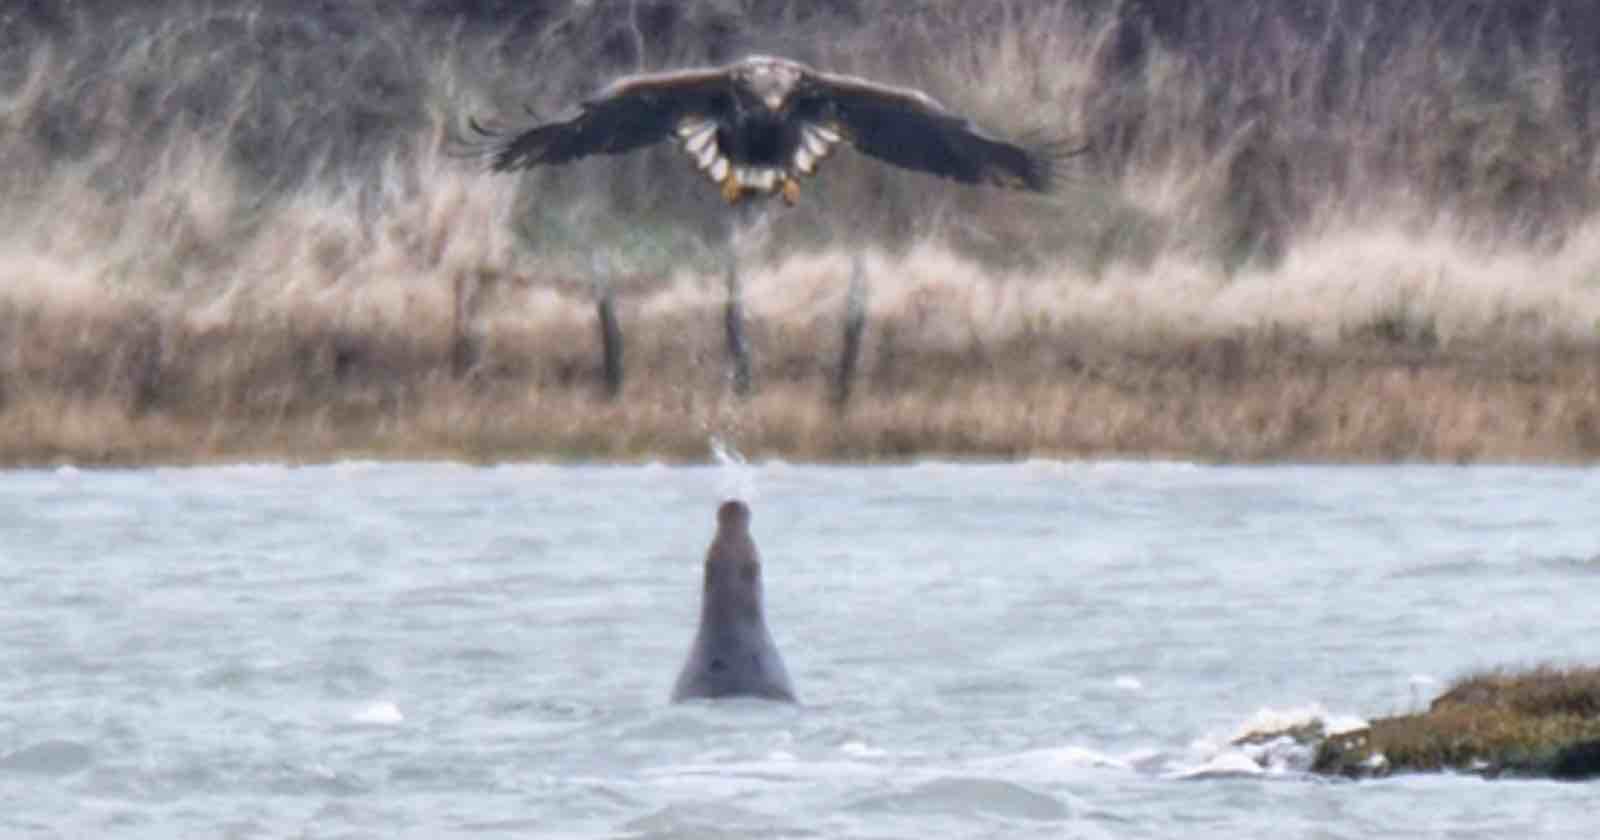  photographer captures seal spitting eagle never-seen-before encounter 